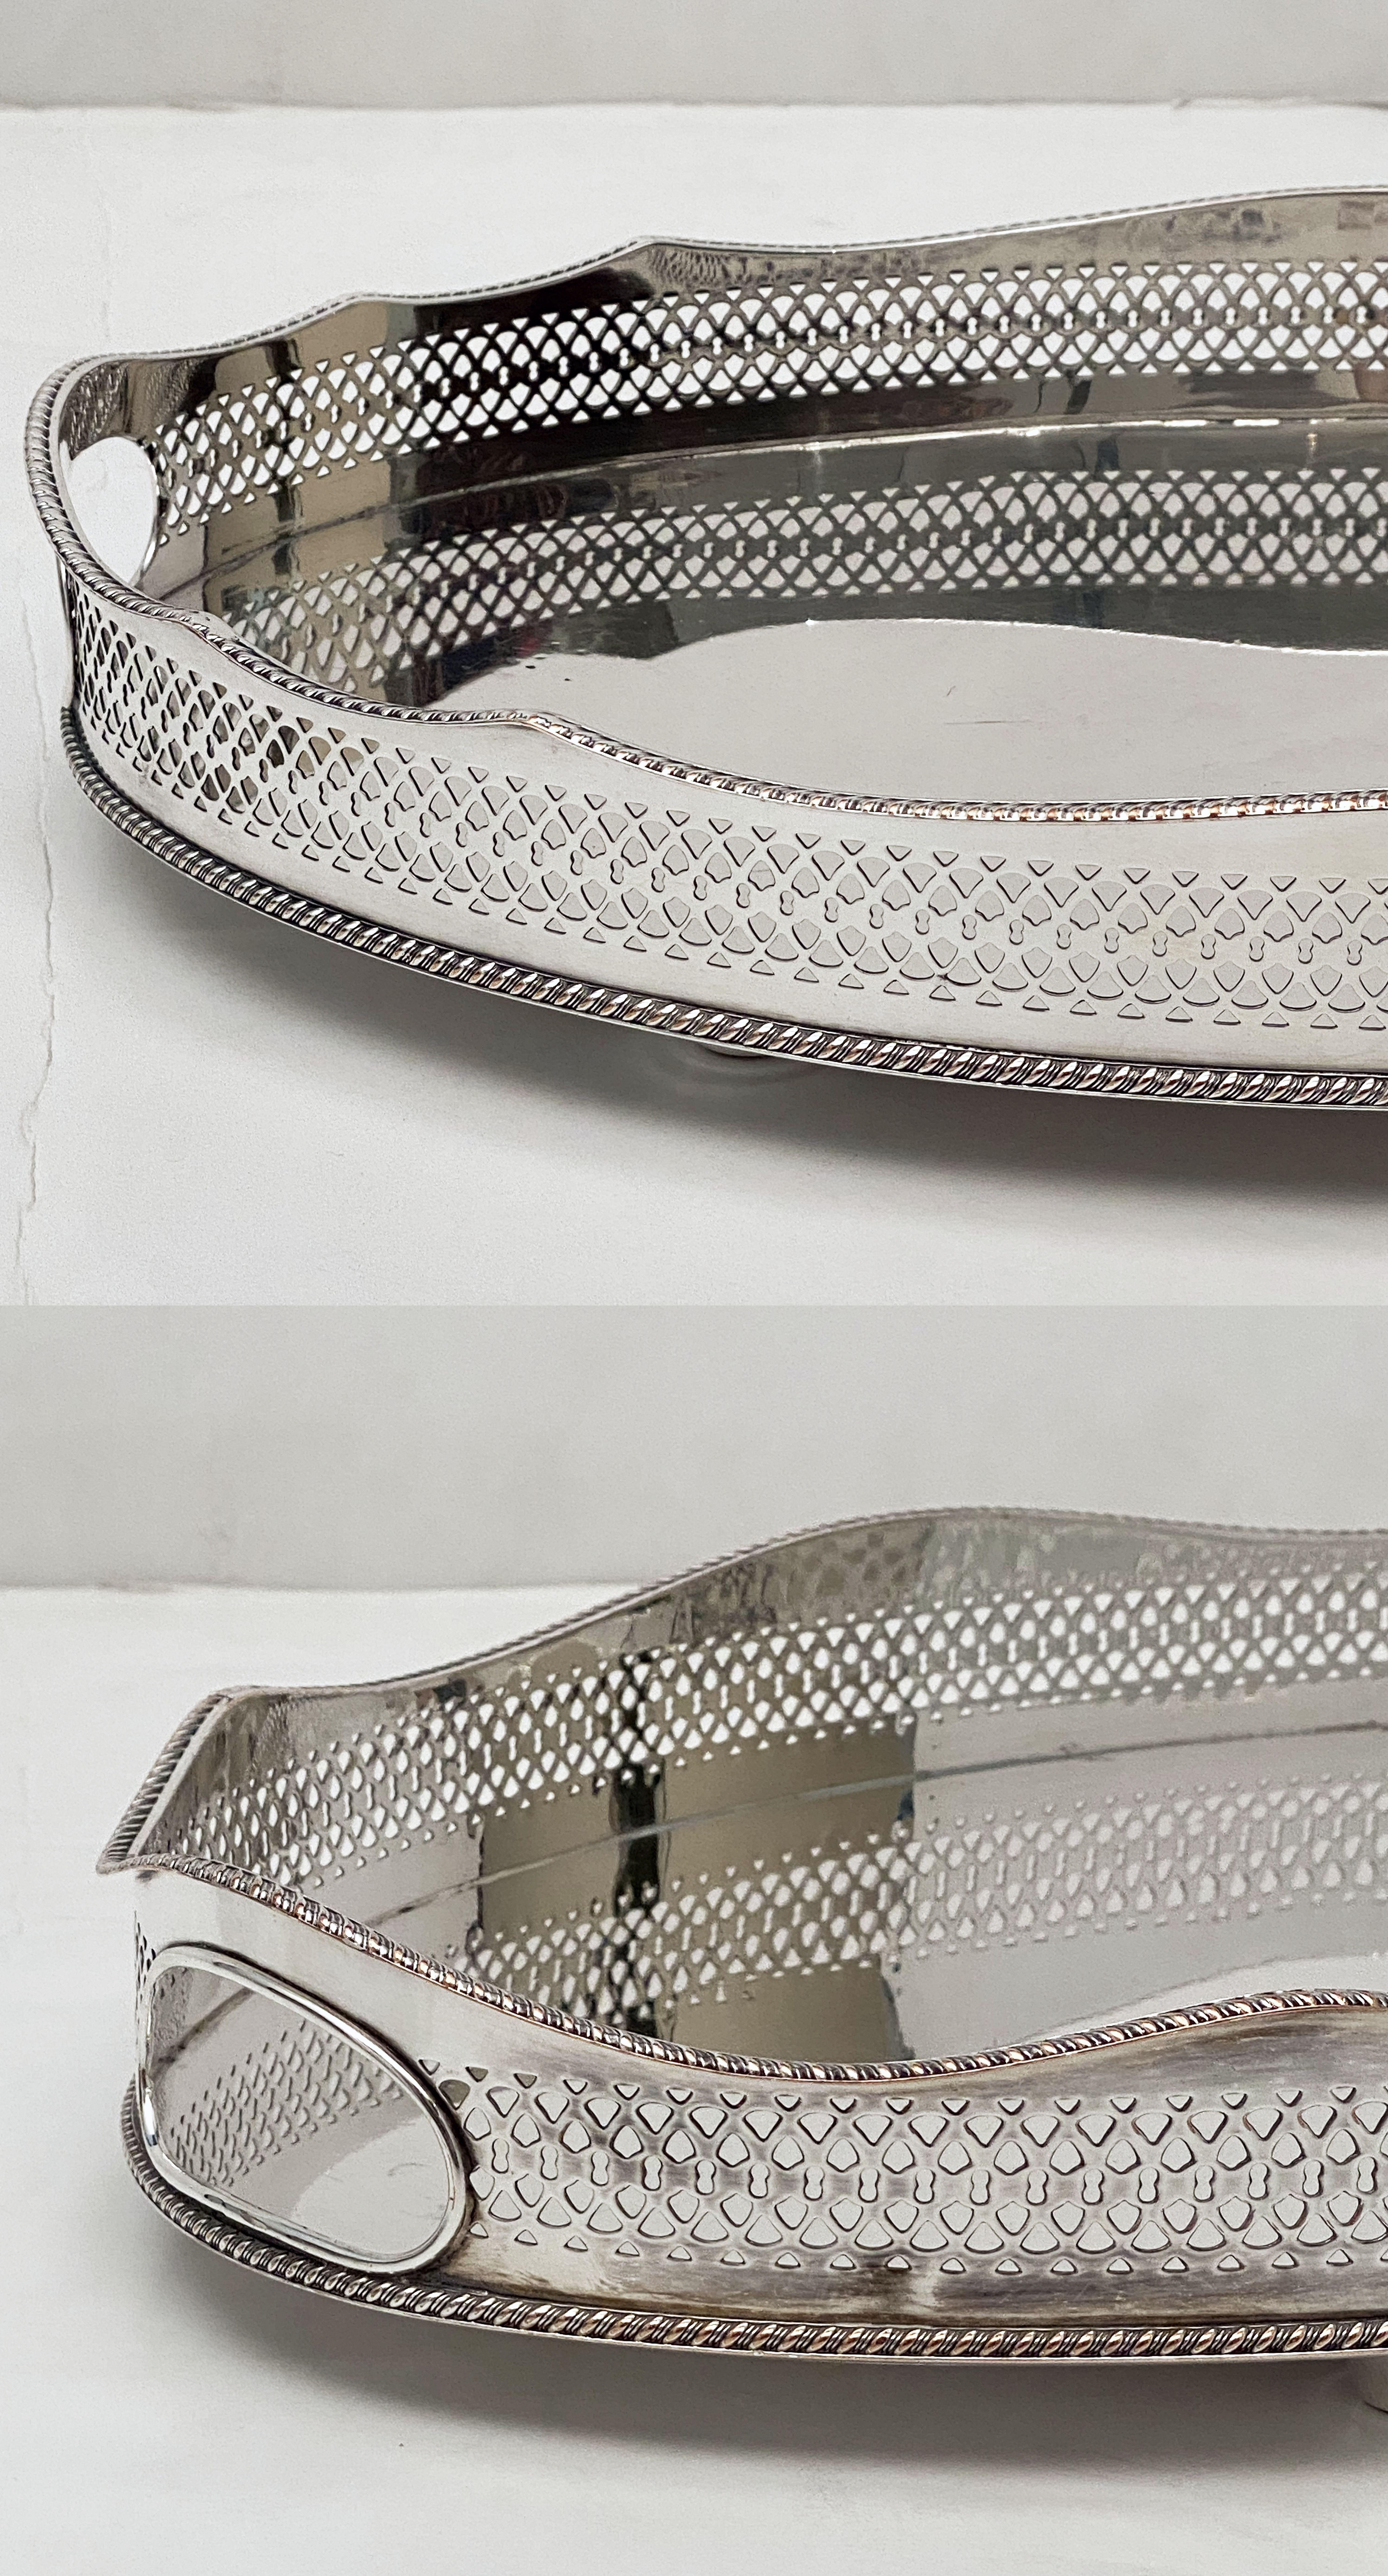 Pair of English Silver Oval Gallery Serving or Drinks Trays 'Priced as a Pair' 13